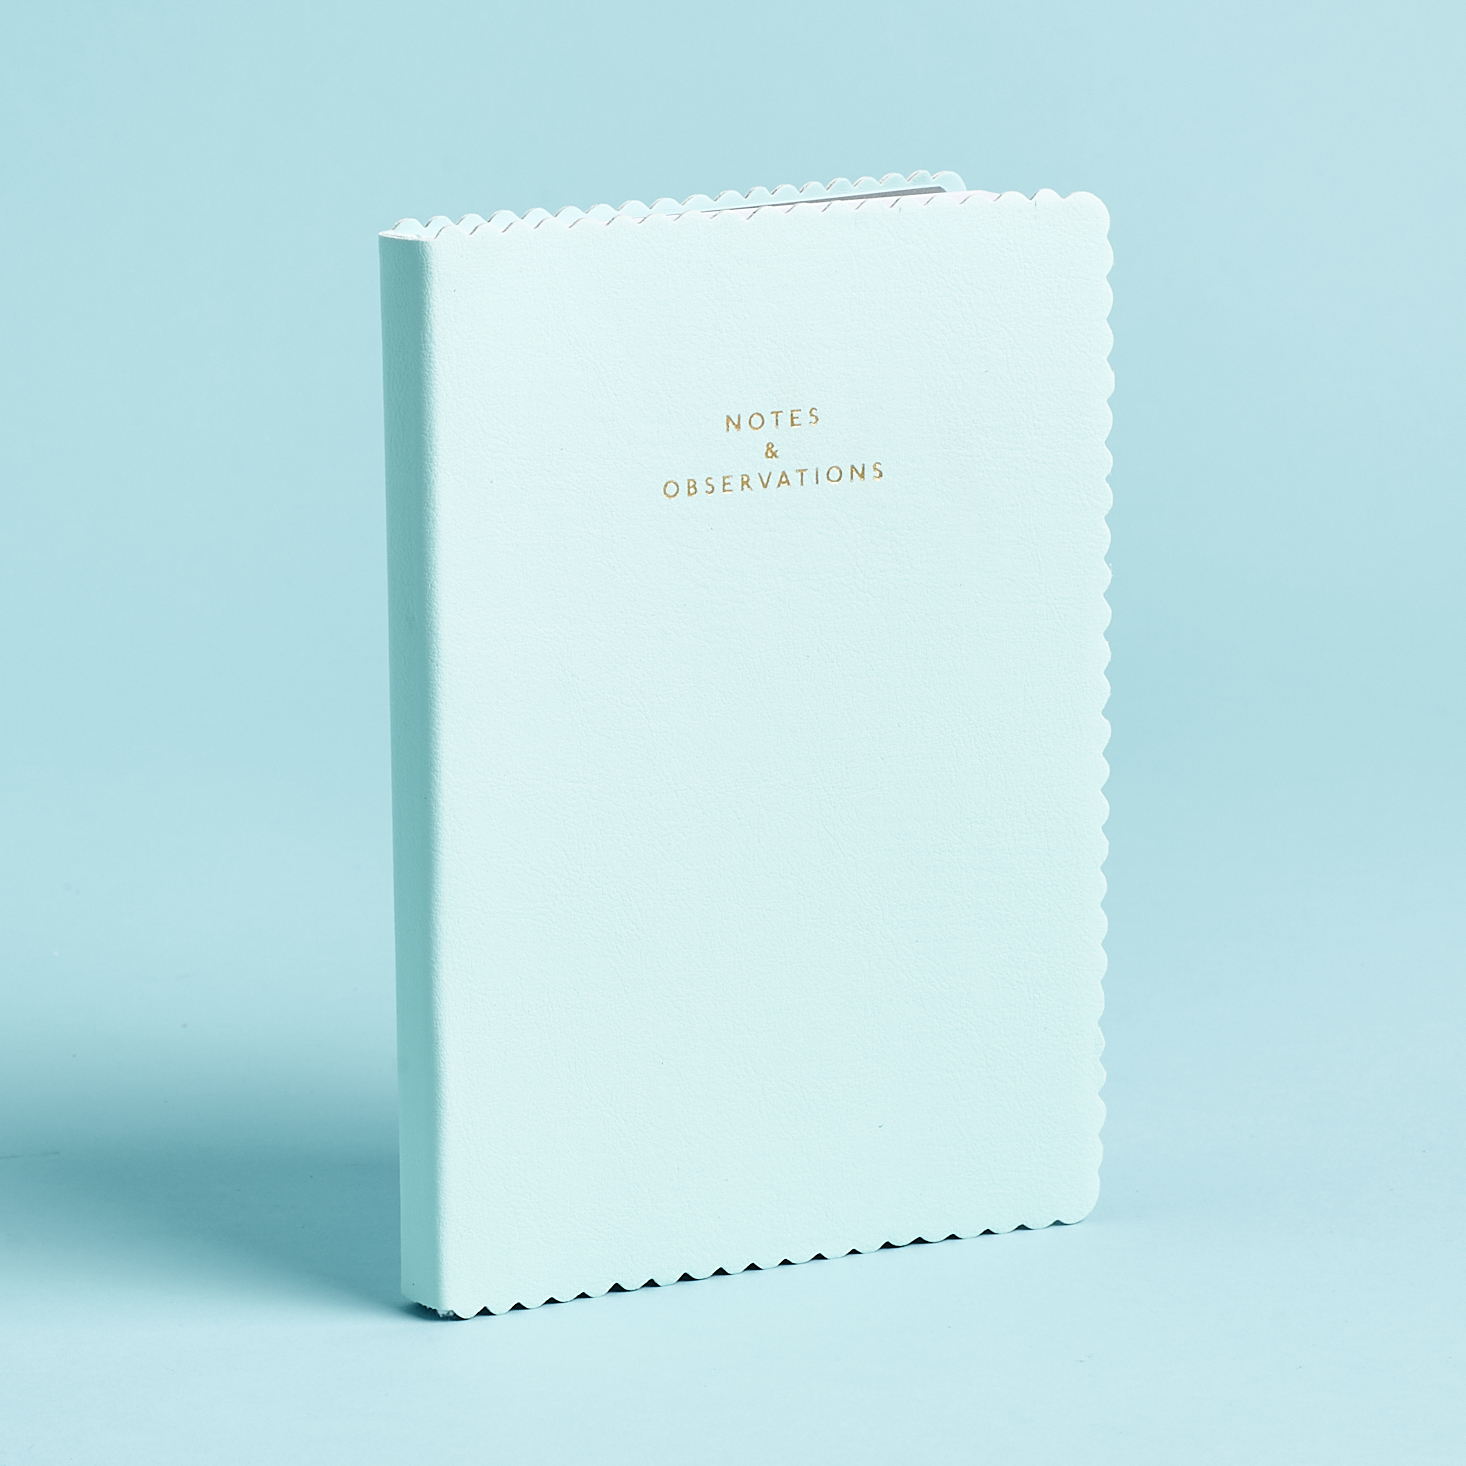 Scalloped journal by Eccolo